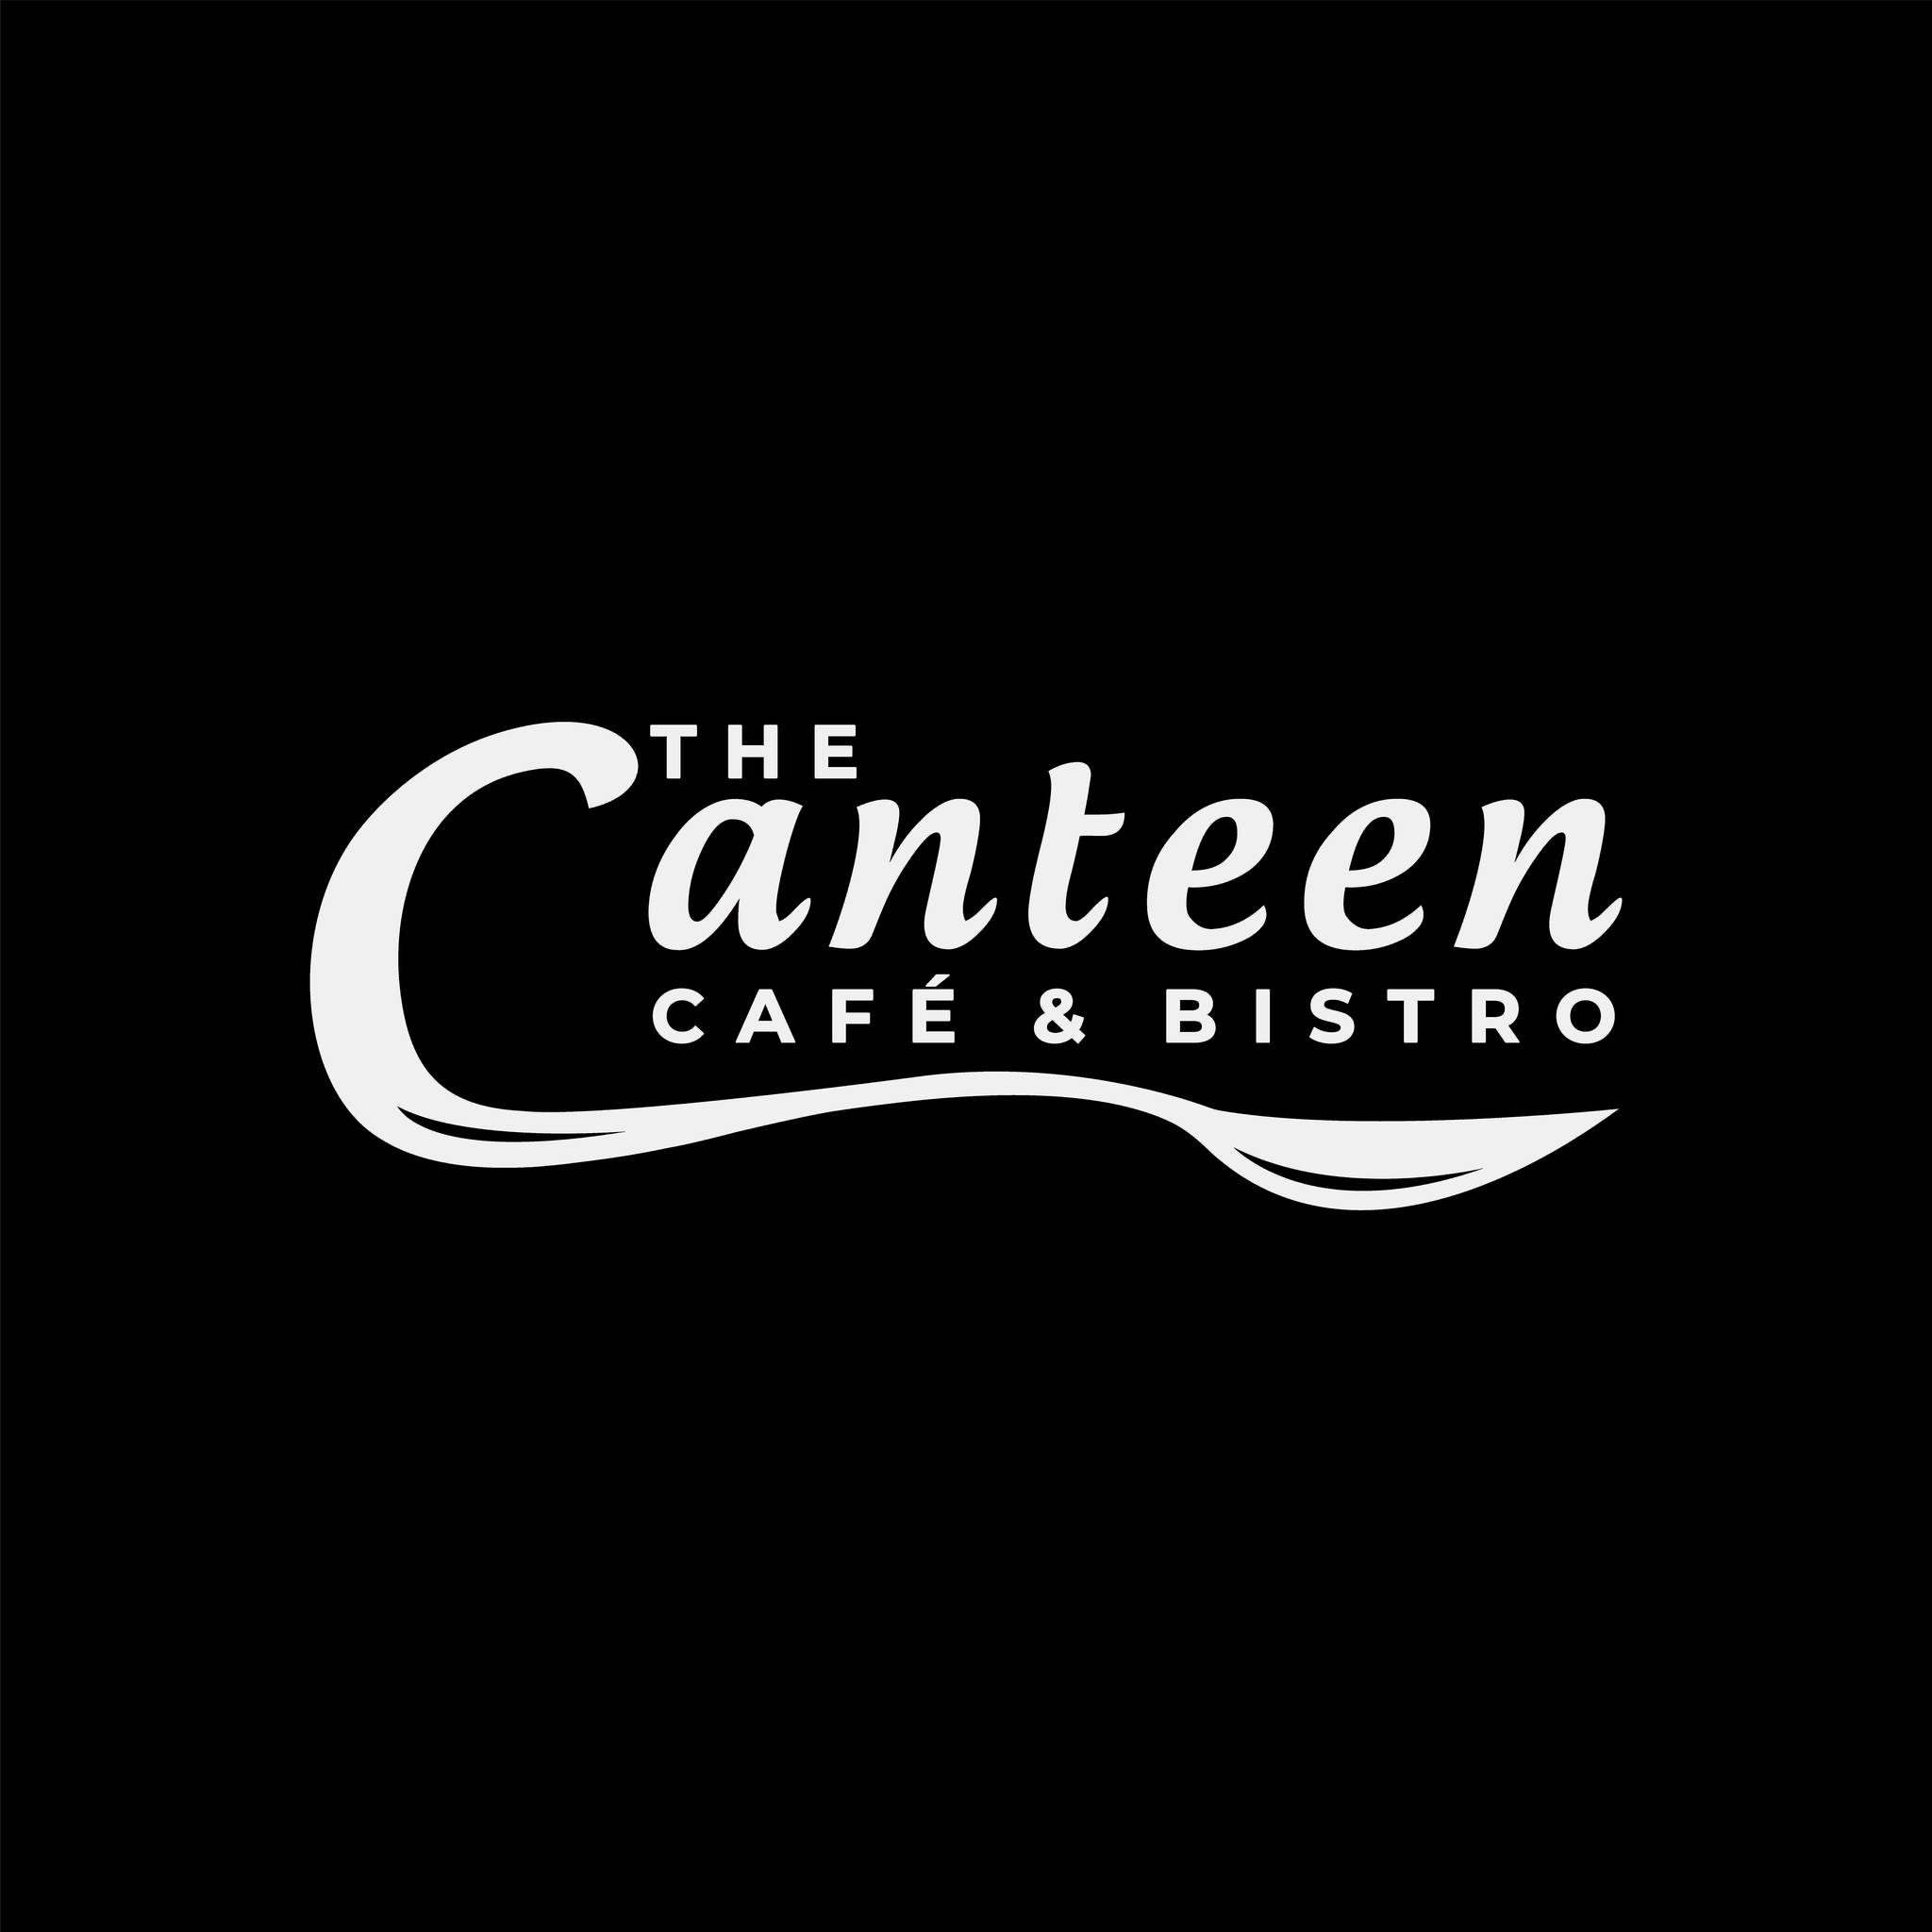 The Canteen - Cafe & Bistro